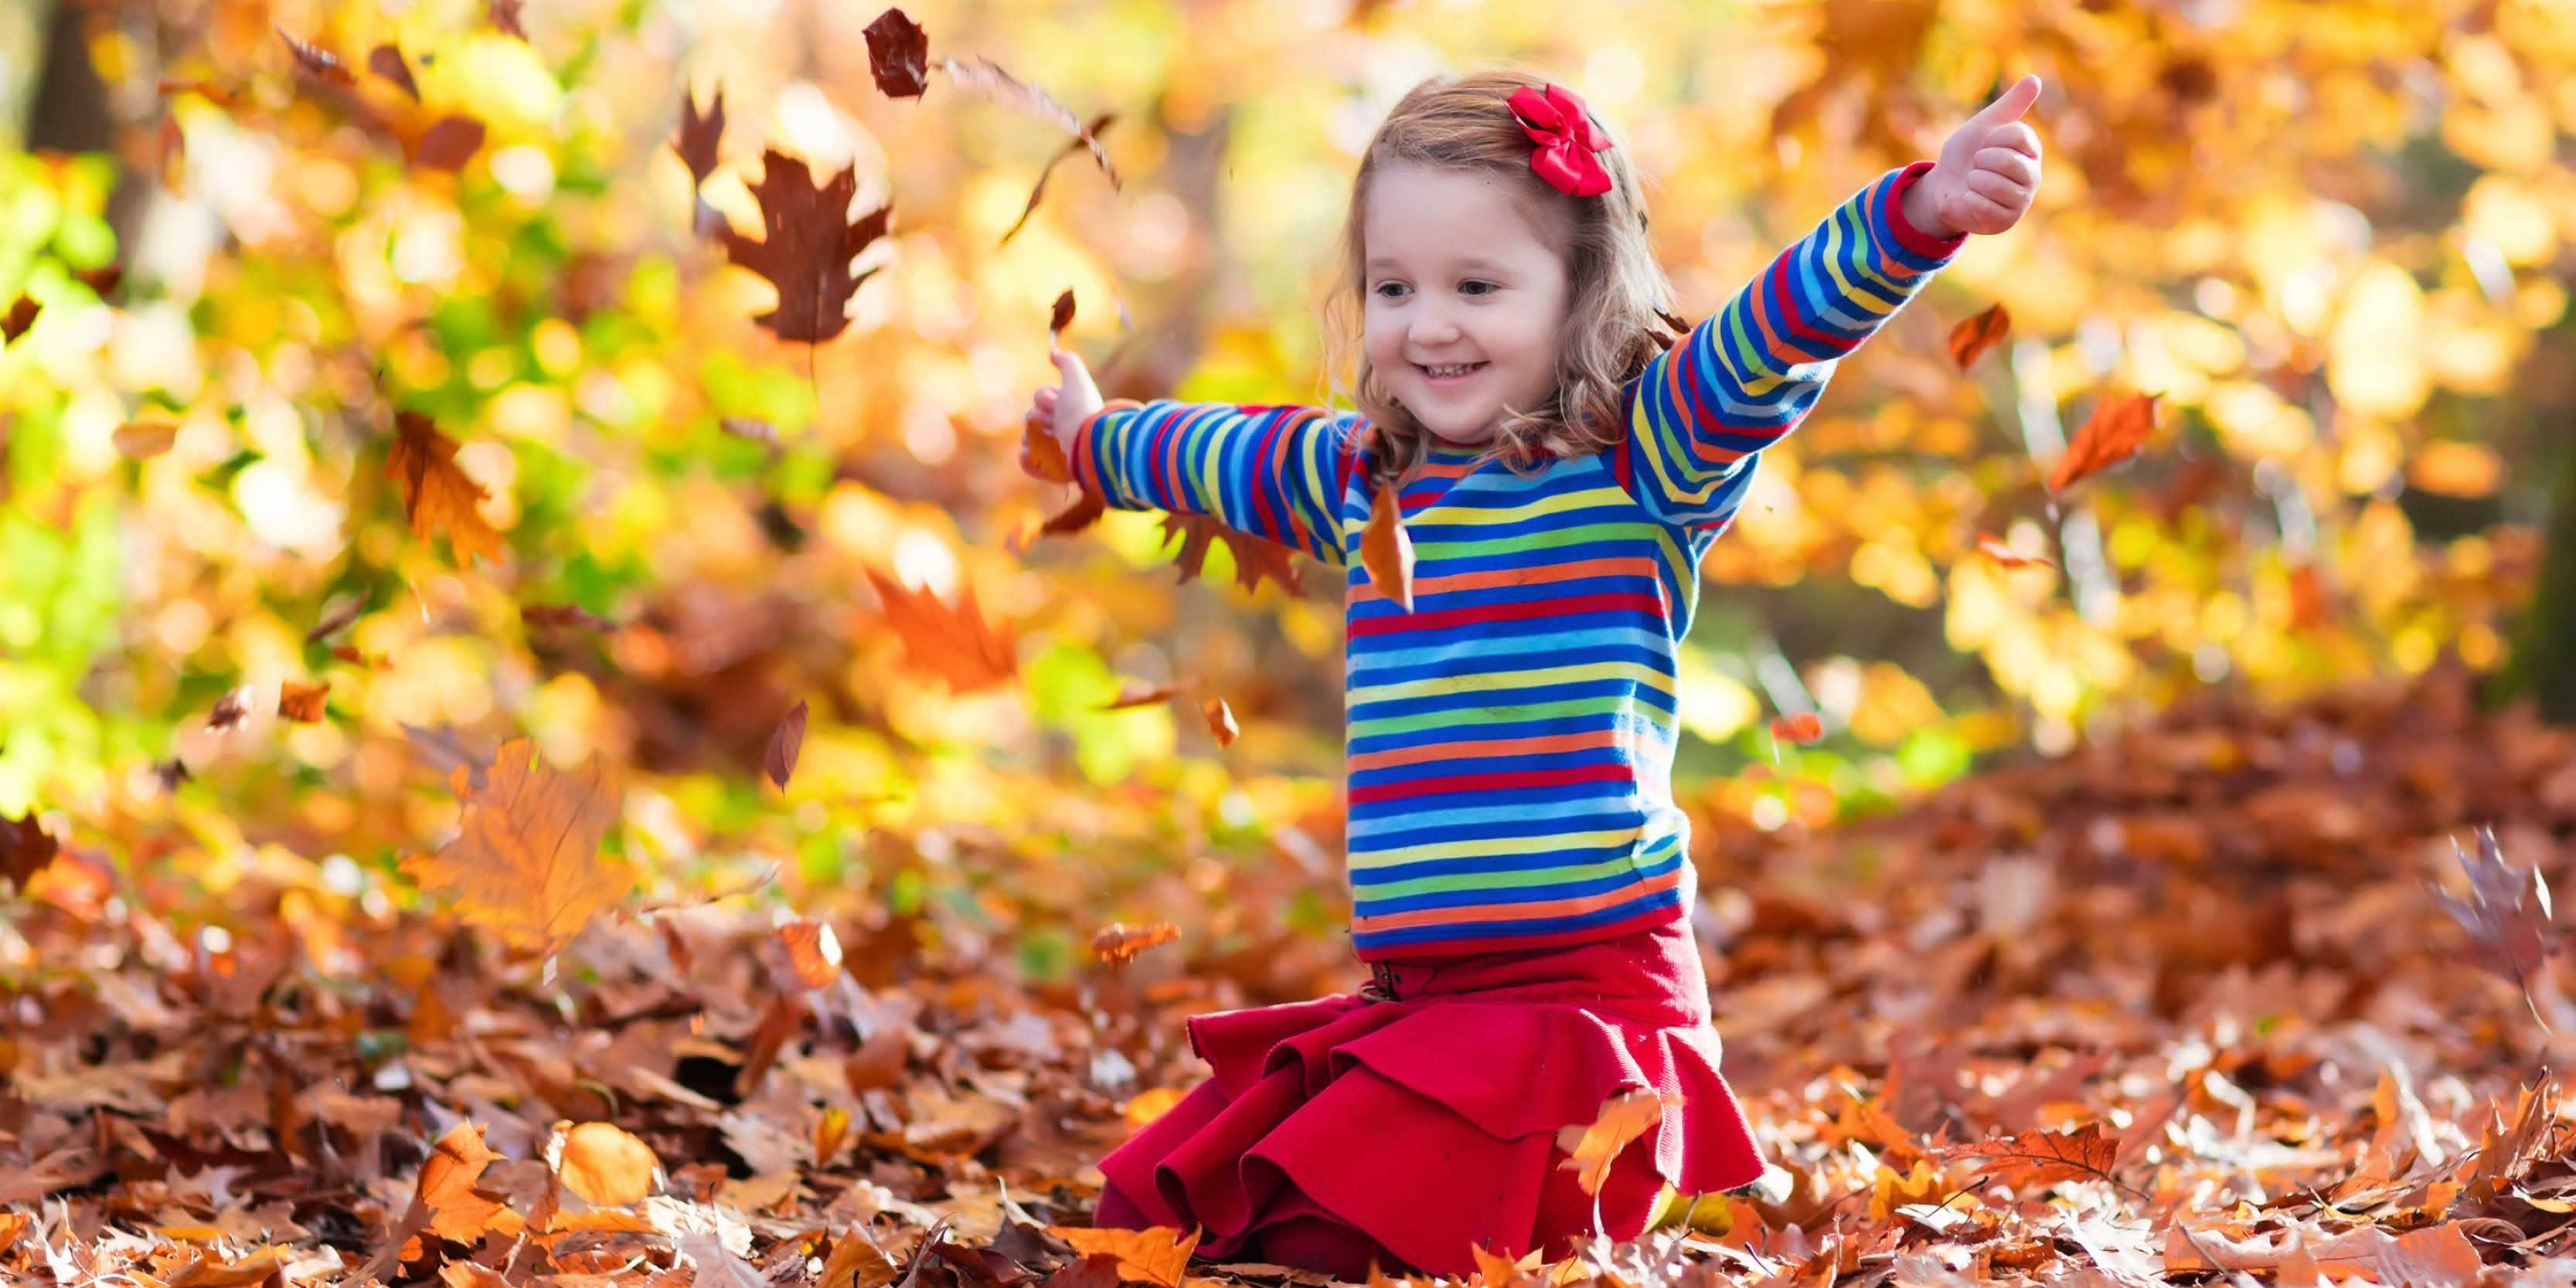 Little girl playing in colourful fall leaves